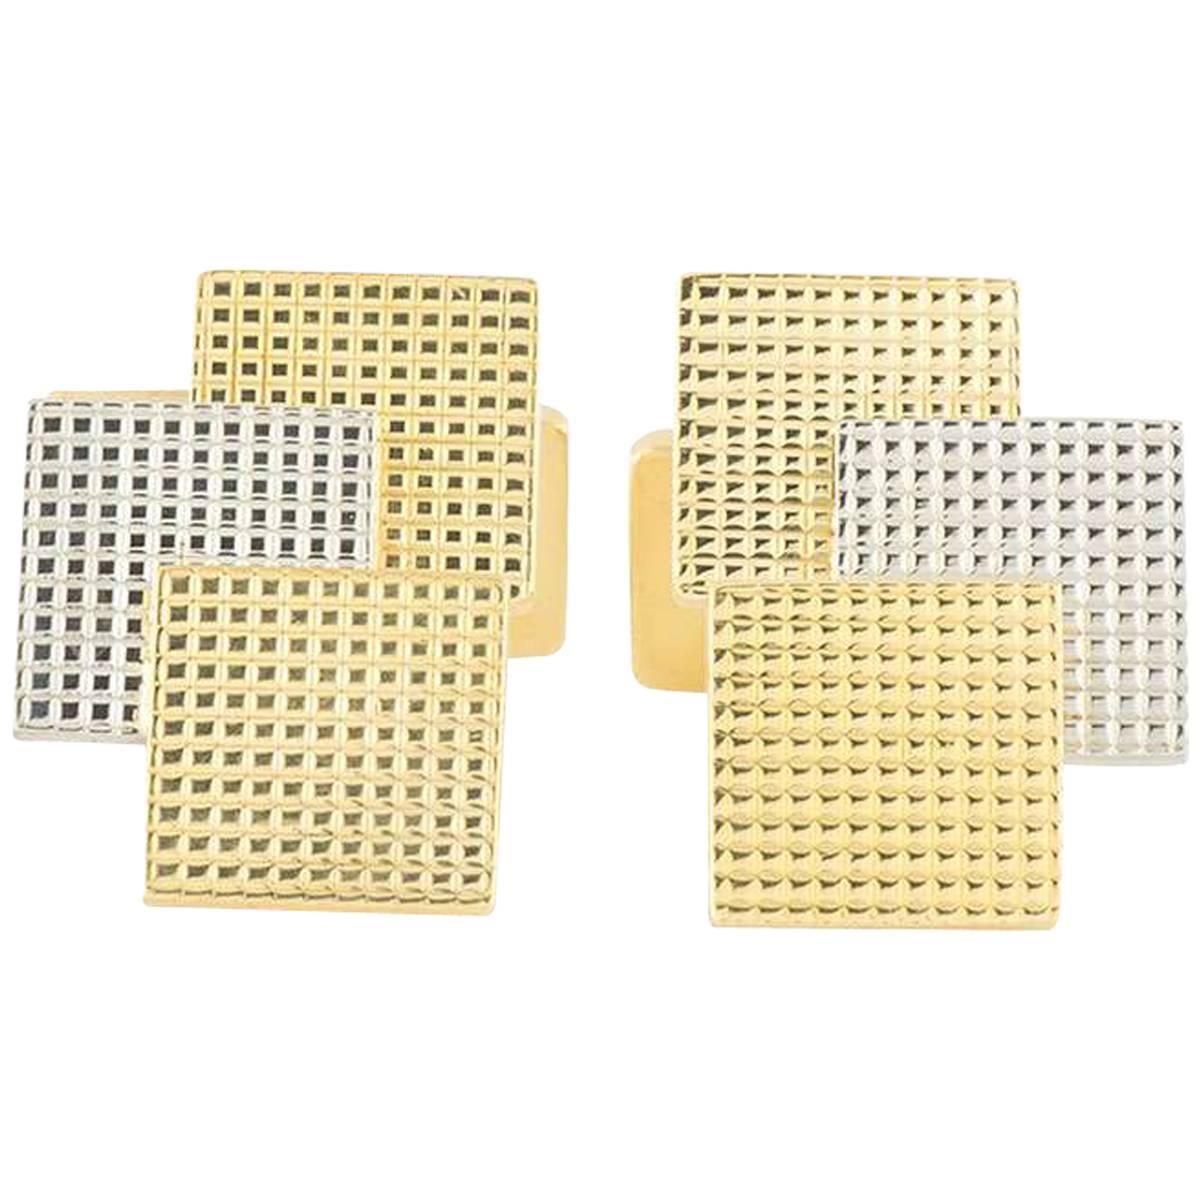 Piaget Square Cufflinks Yellow and White Gold